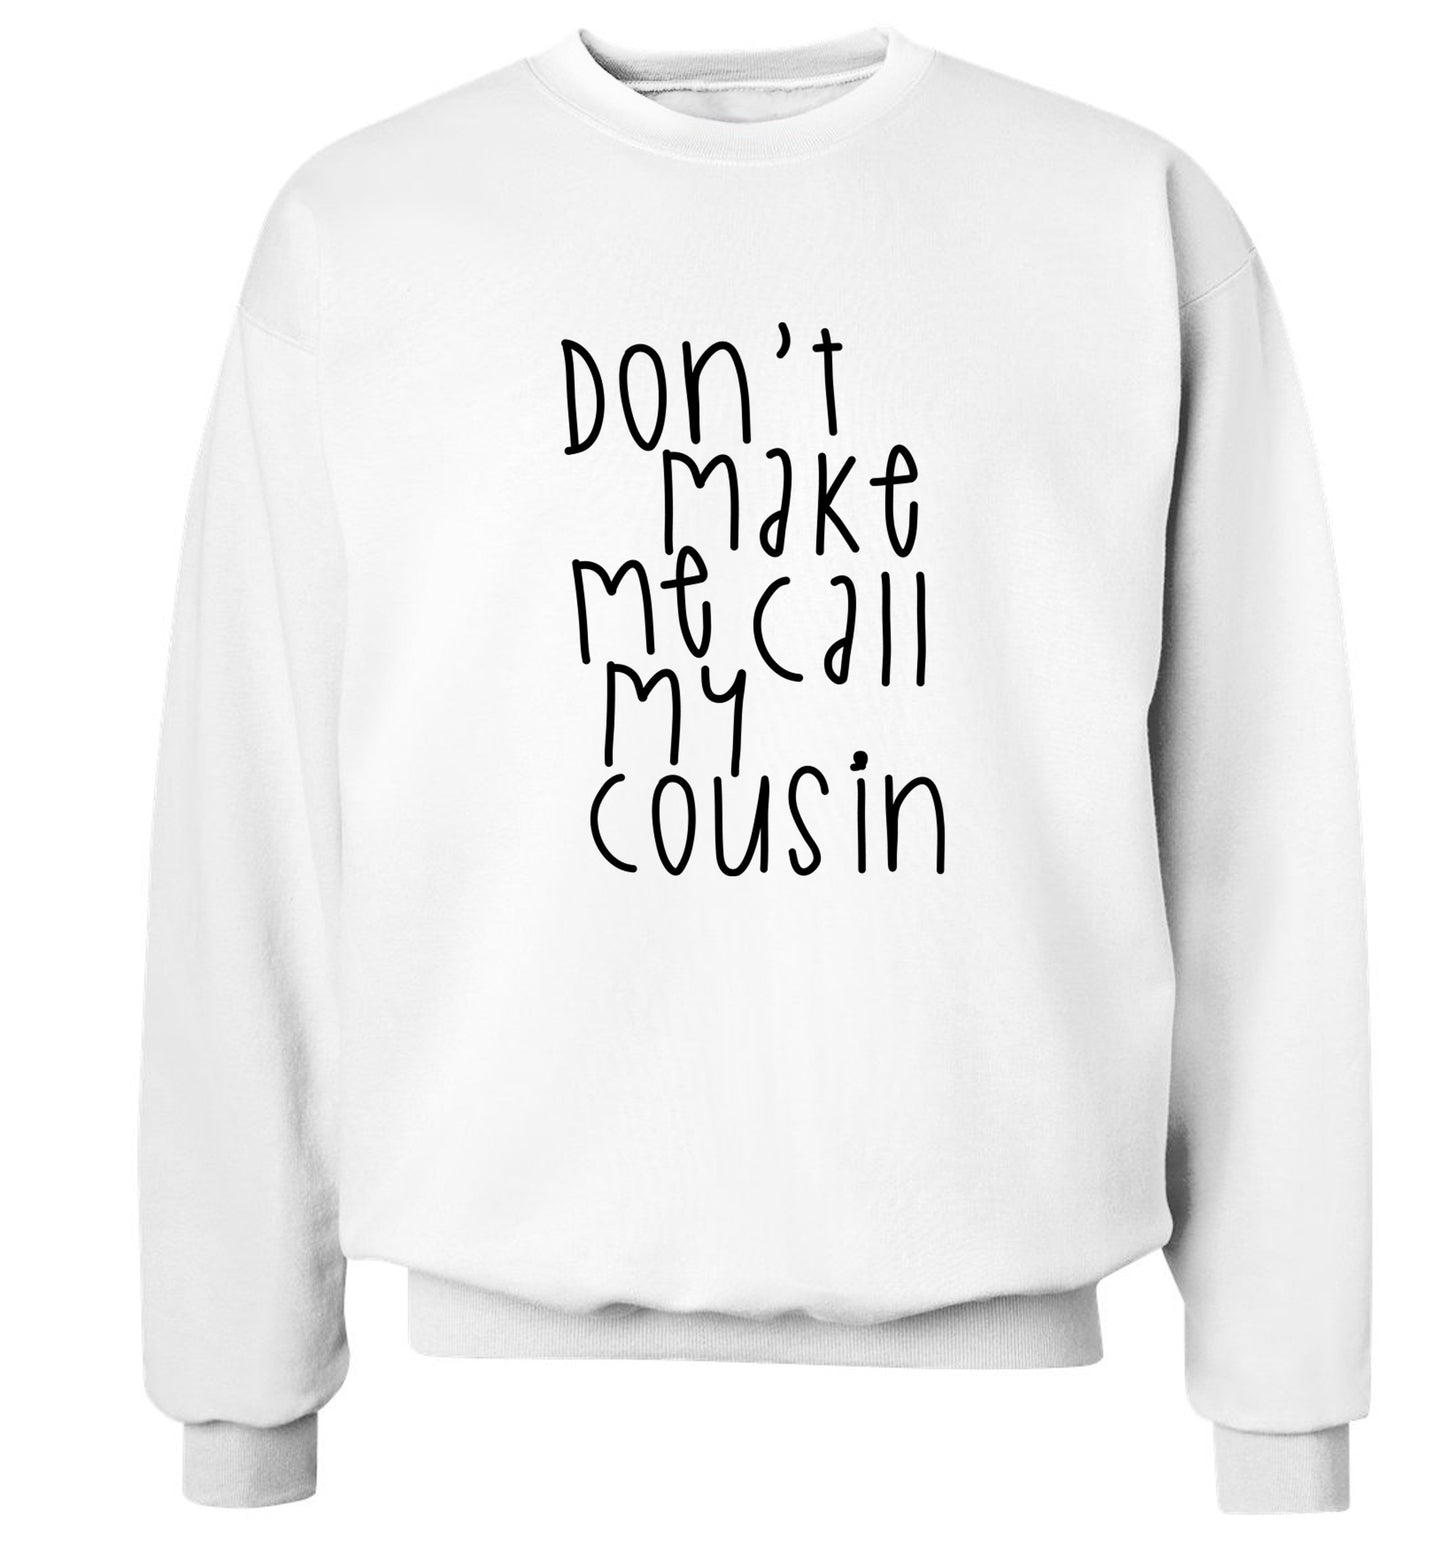 Don't make me call my cousin Adult's unisex white Sweater 2XL